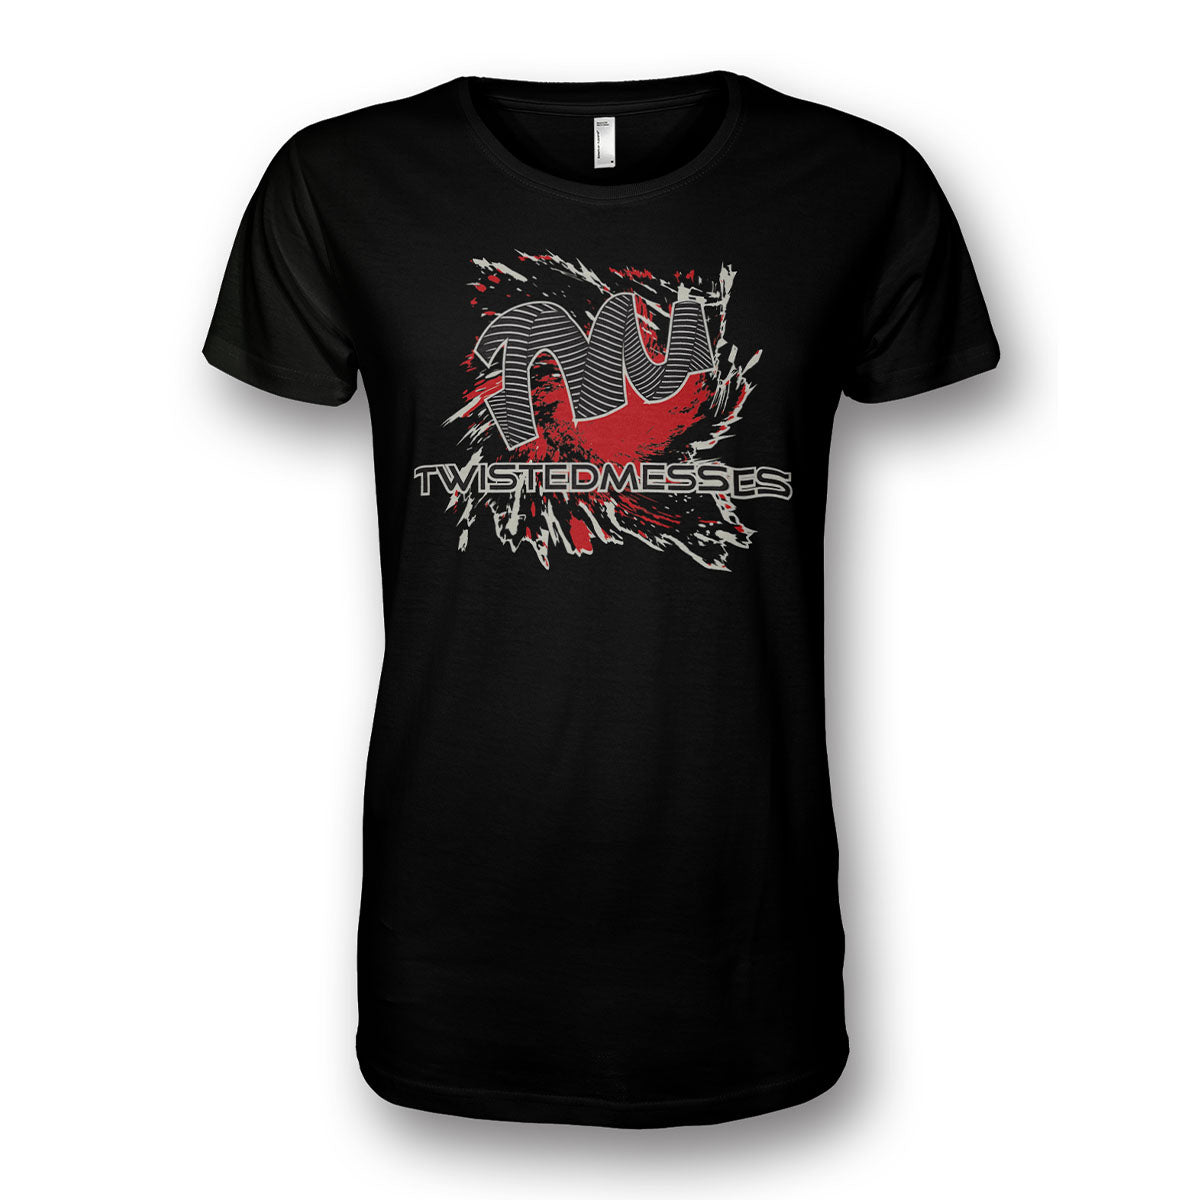 T-Shirt Black/Red by Twisted Messes